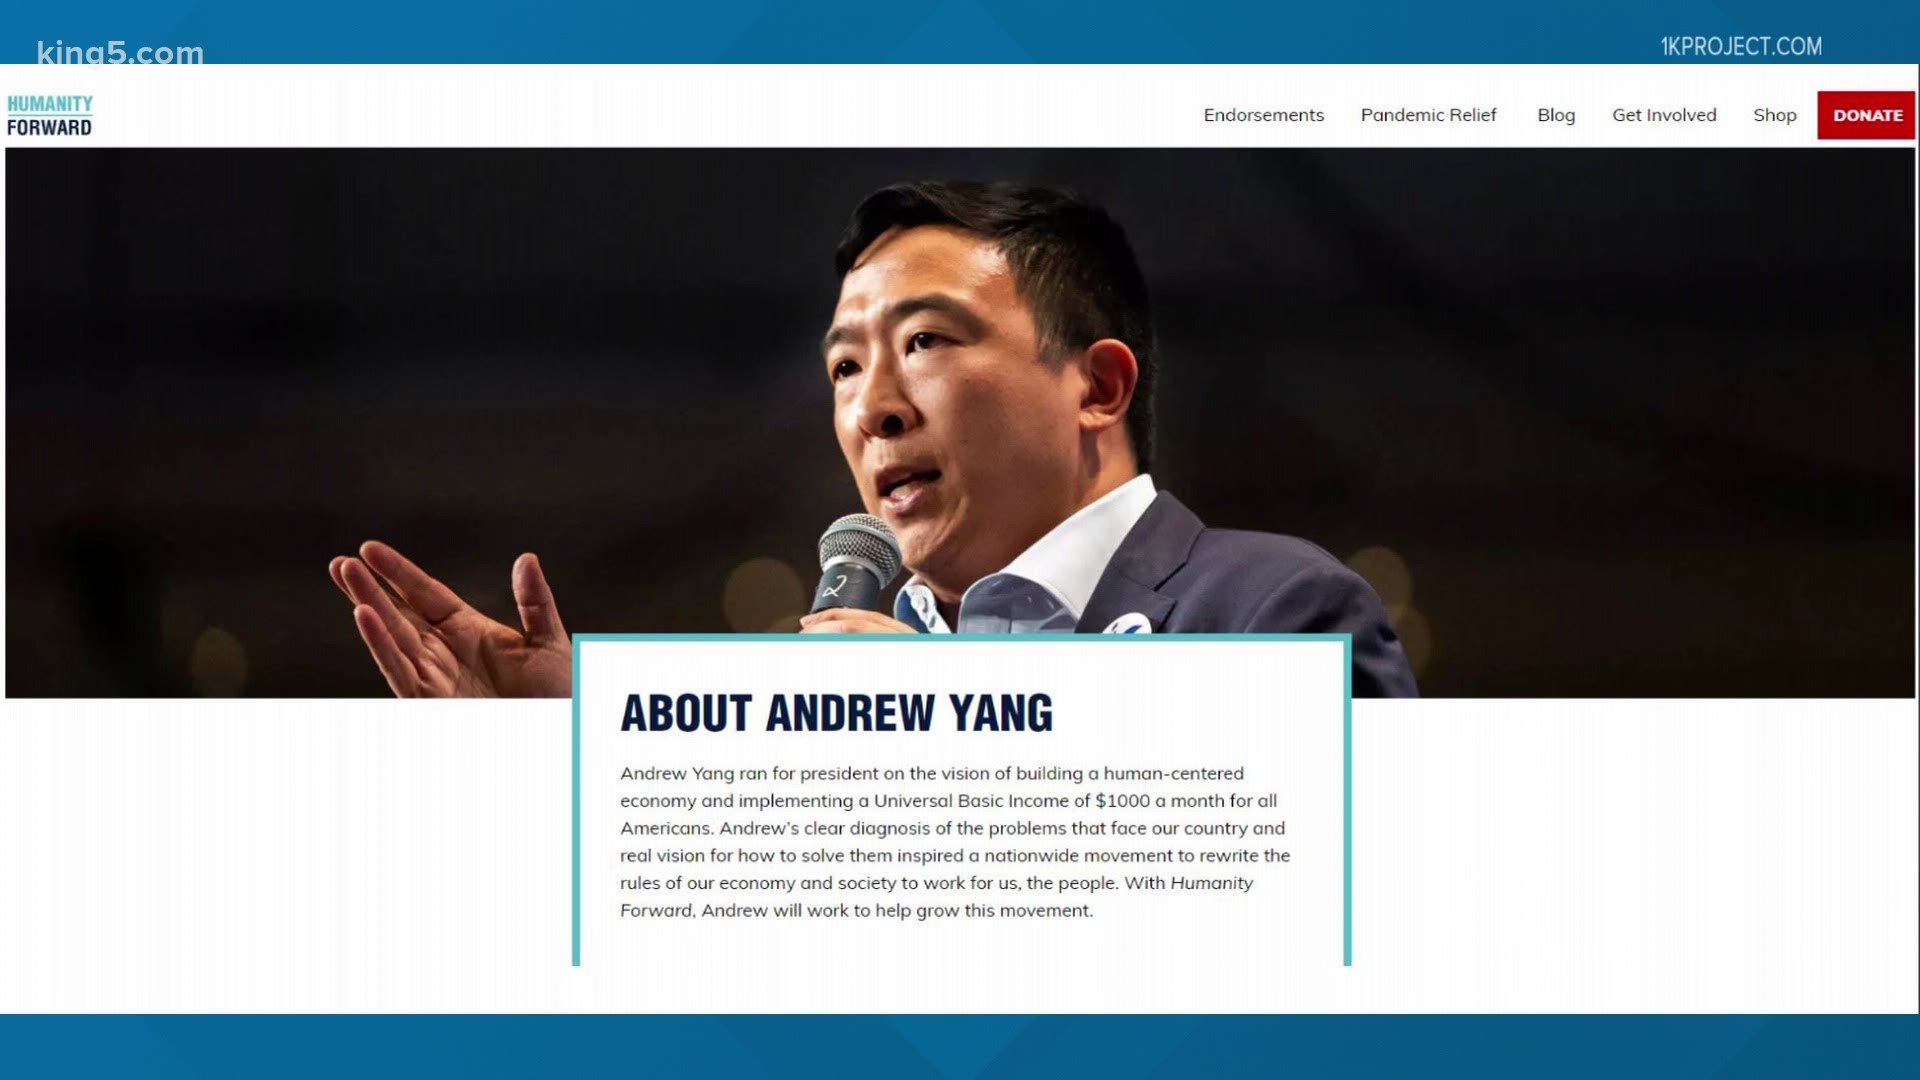 Andrew Yang is backing the Seattle-based 1K Project, which offers pandemic assistance, and will match donations through his Humanity Forward Foundation.